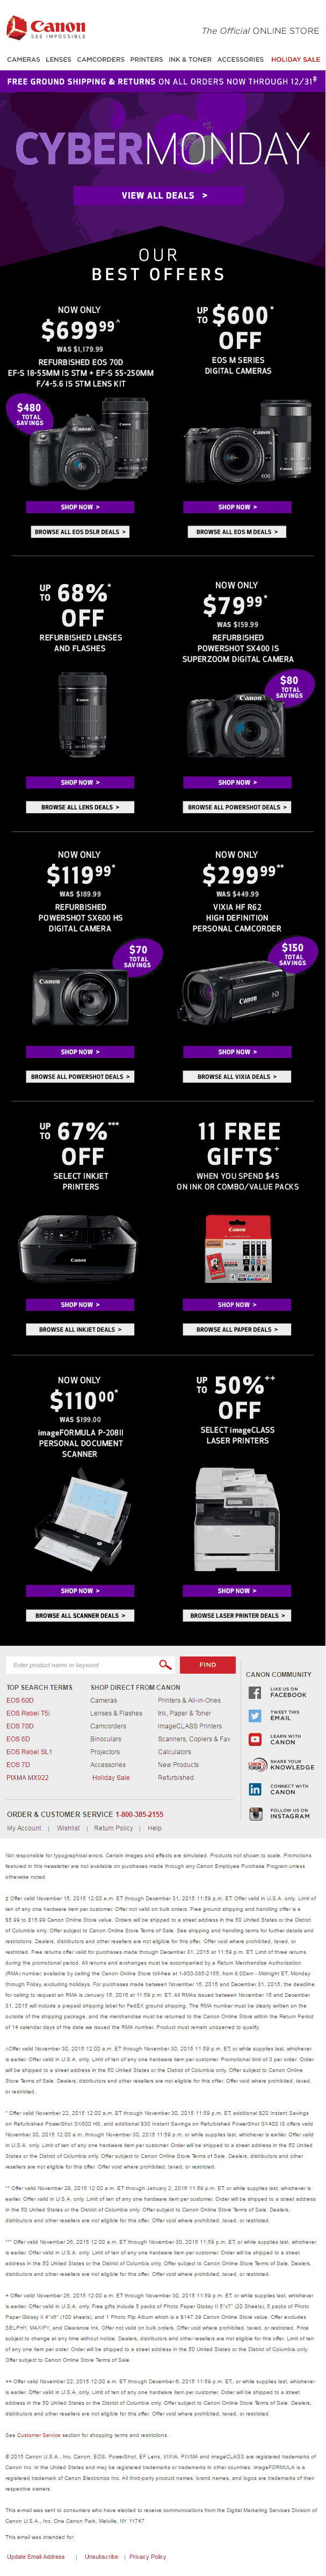 Cyber Monday Email-Canon